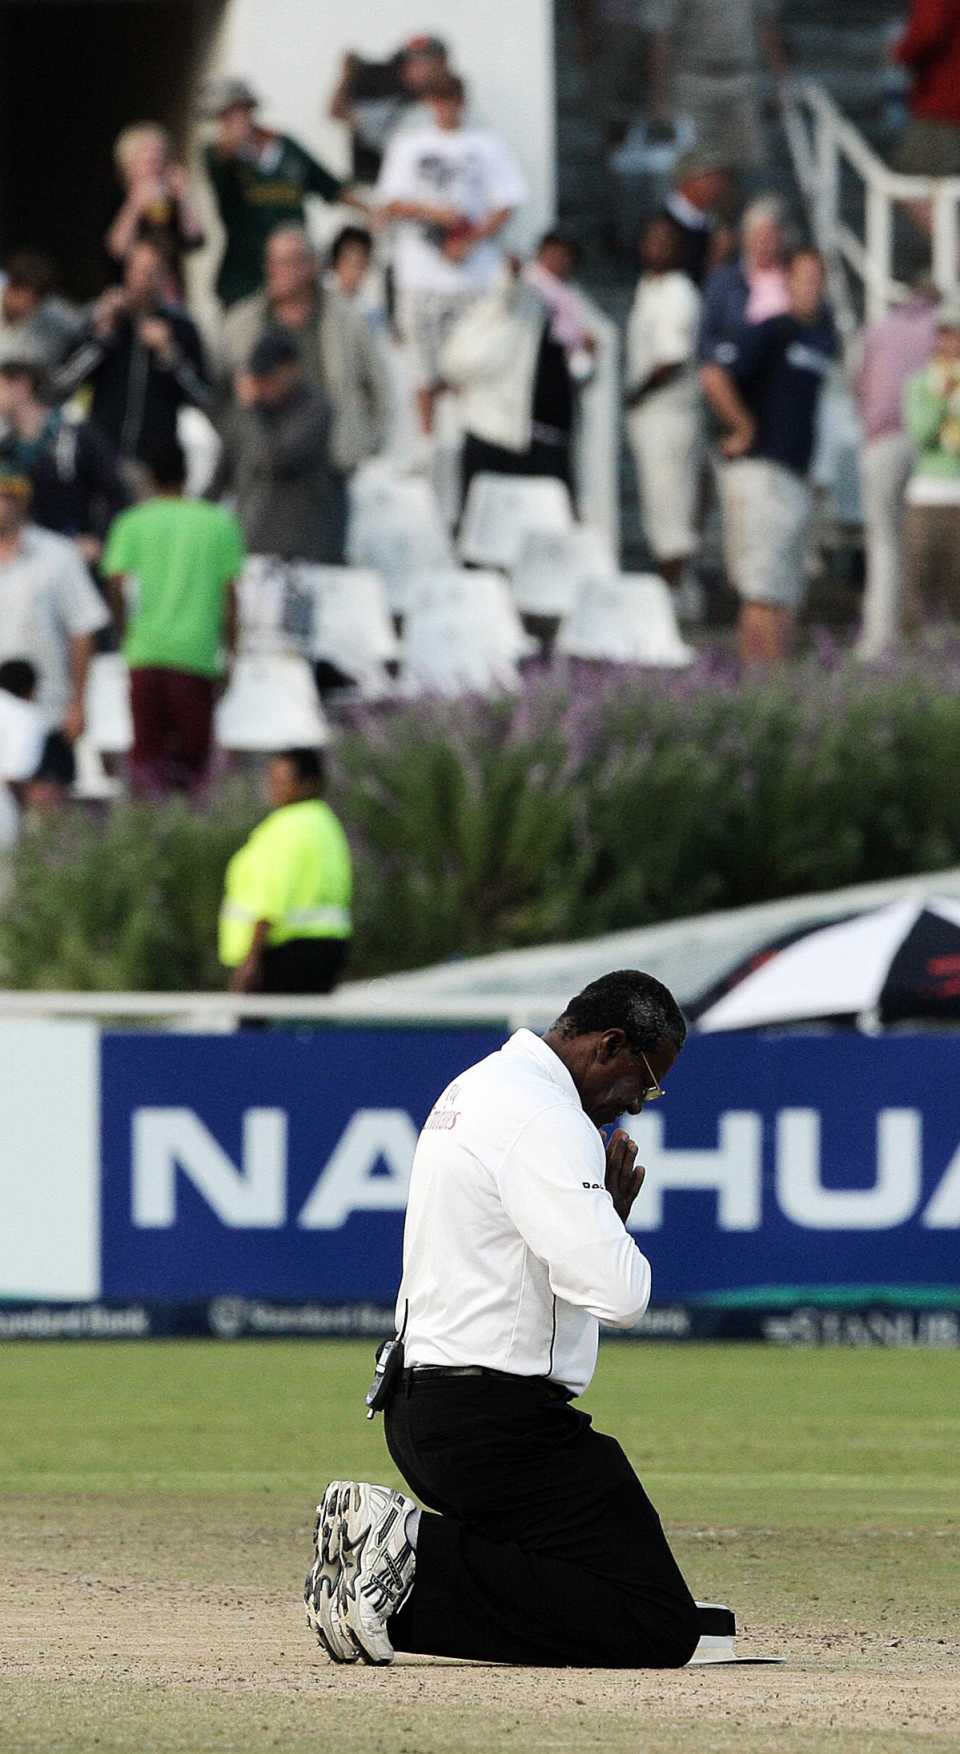 Steve Bucknor prays on the pitch during his final Test, South Africa v Australia, 3rd Test, 4th day, Cape Town, March 22, 2009